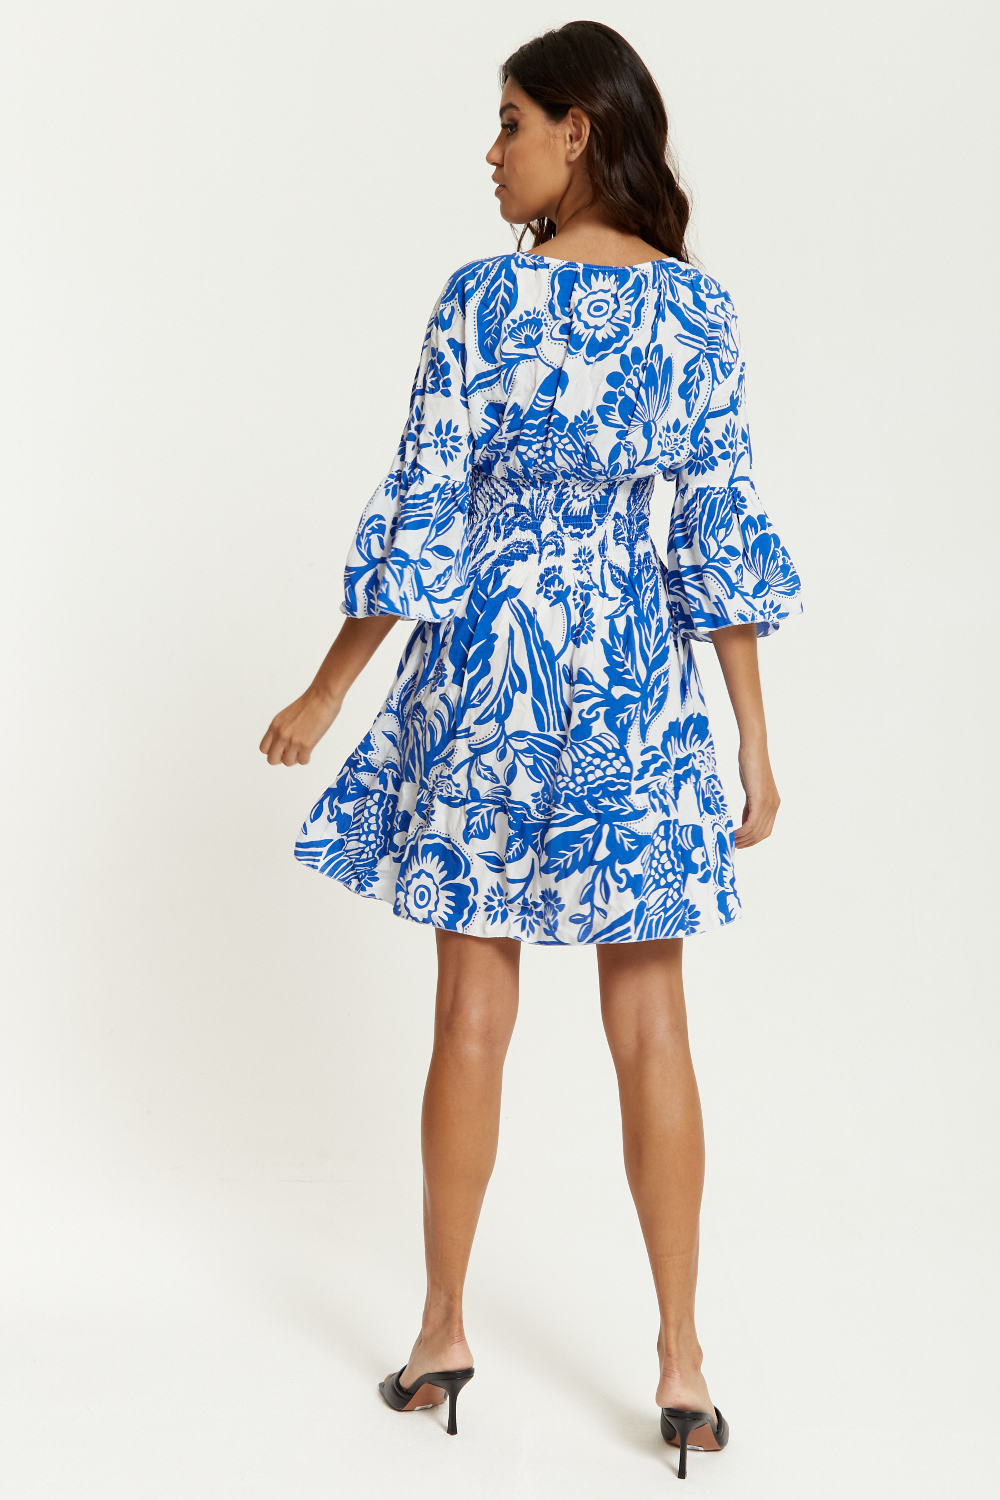 Oversized V Neck Detailed Floral Print Mini Dress in Blue and White GLR FASHION NETWORKING